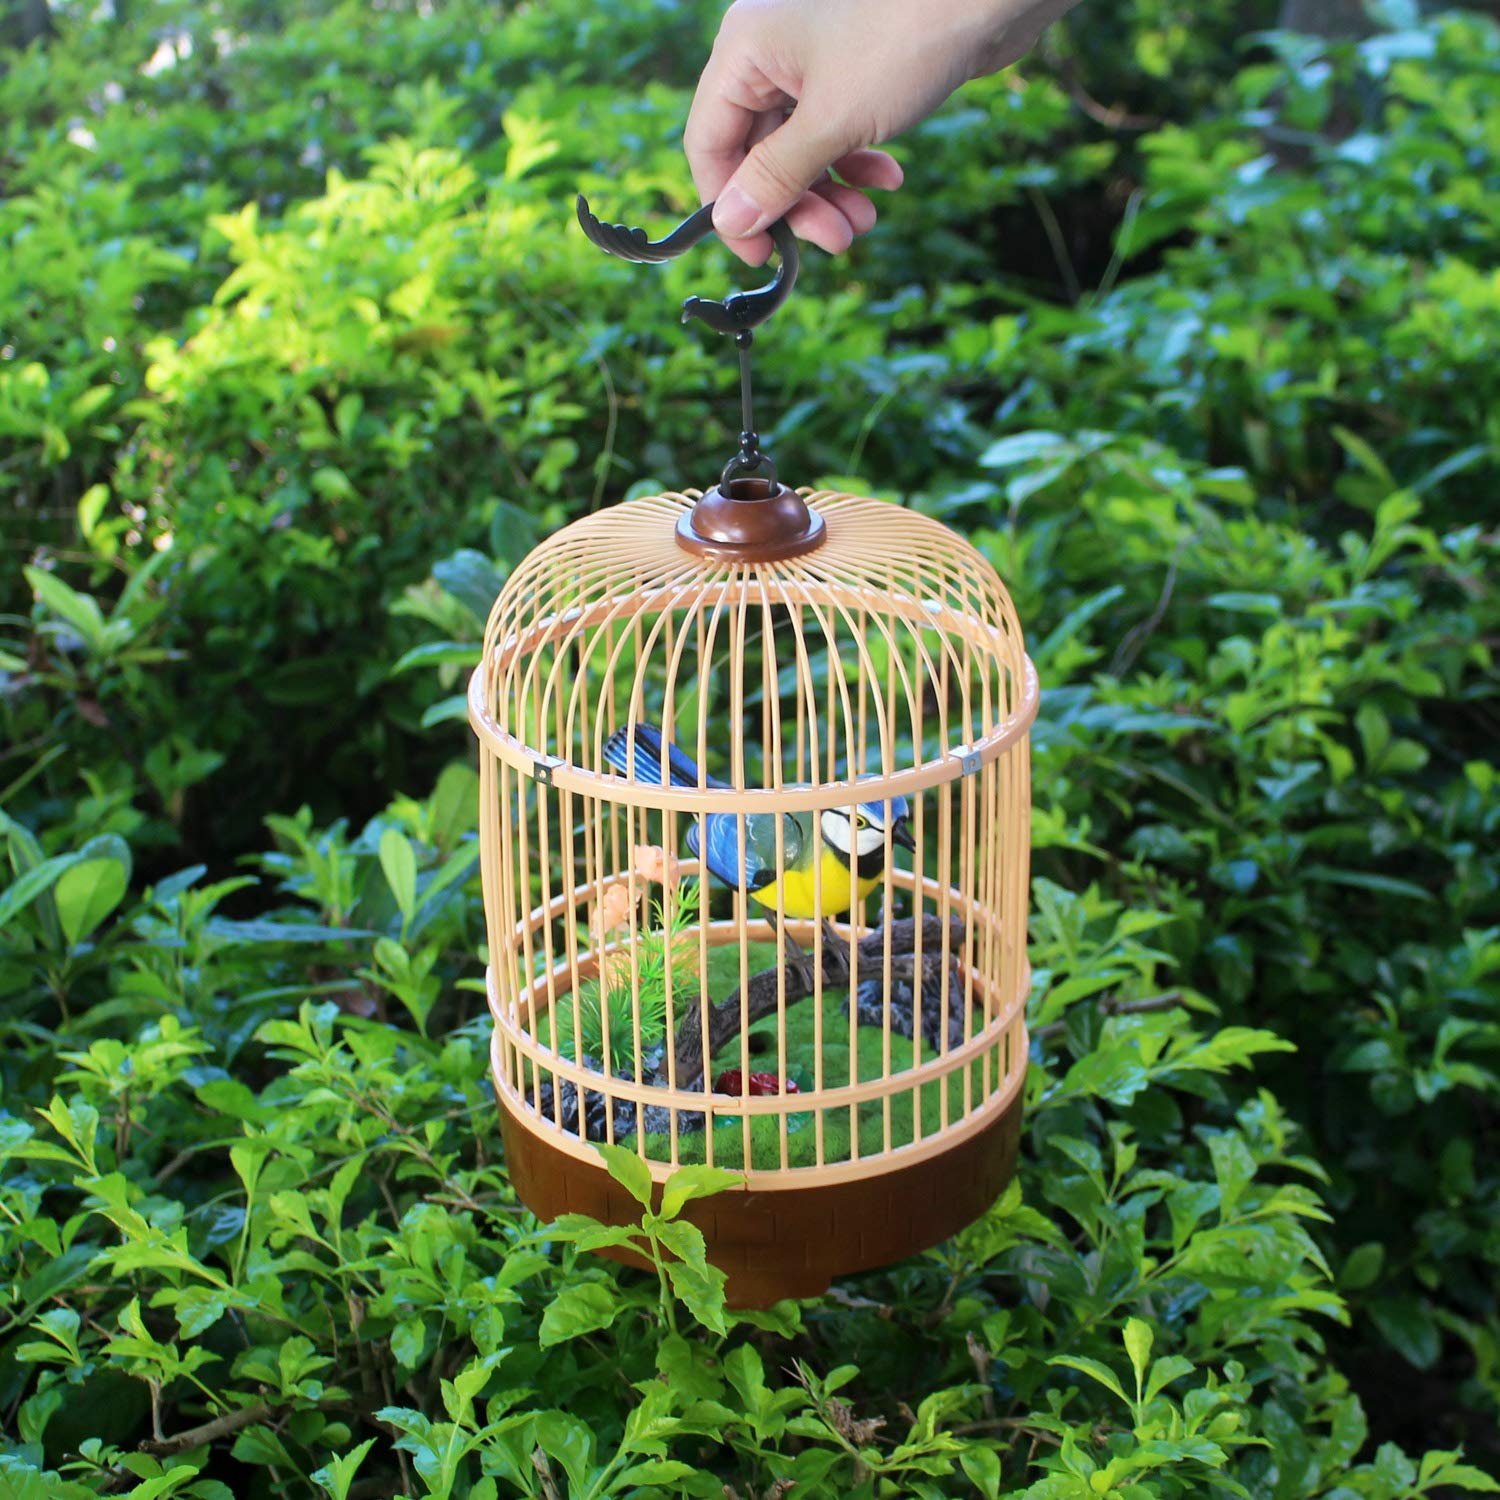 Tipmant Cute Electronic Pets Simulation Sparrow Bird in Cage Move Chirp Home Room Decor Ornament Kids Toys Gifts (Blue)